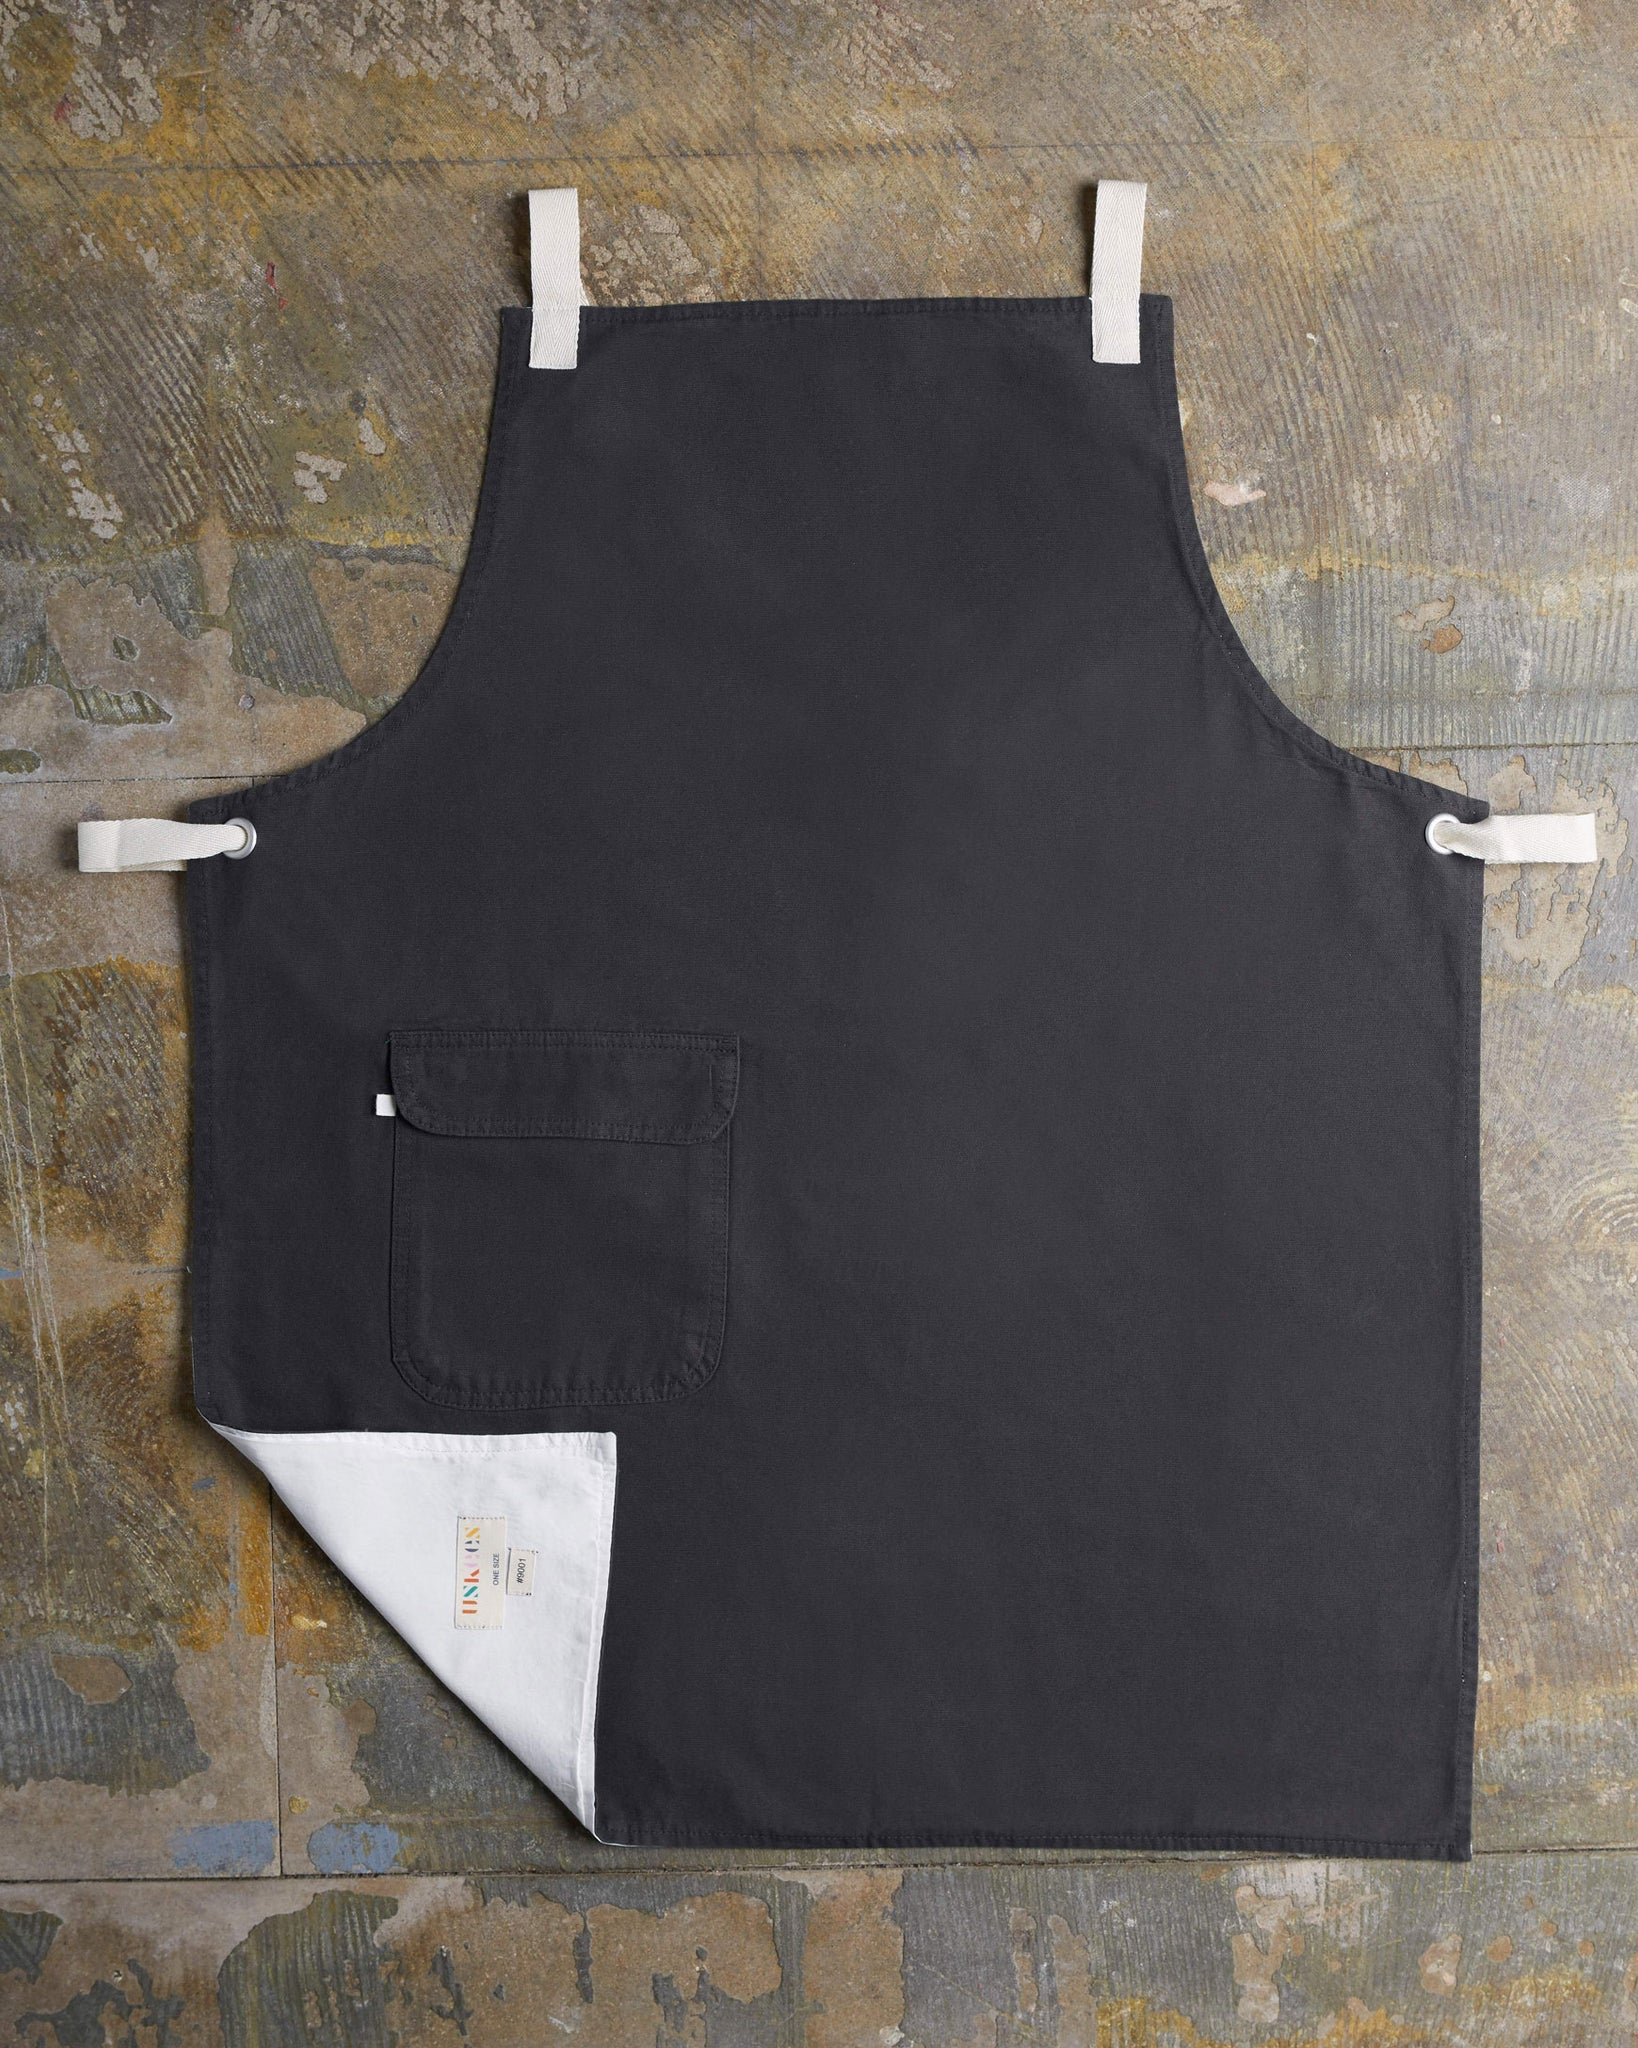 Full, flat view of faded black #9001 work apron by Uskees. Showing hip pocket with left corner folded up to reveal lining and 'Uskees' label.